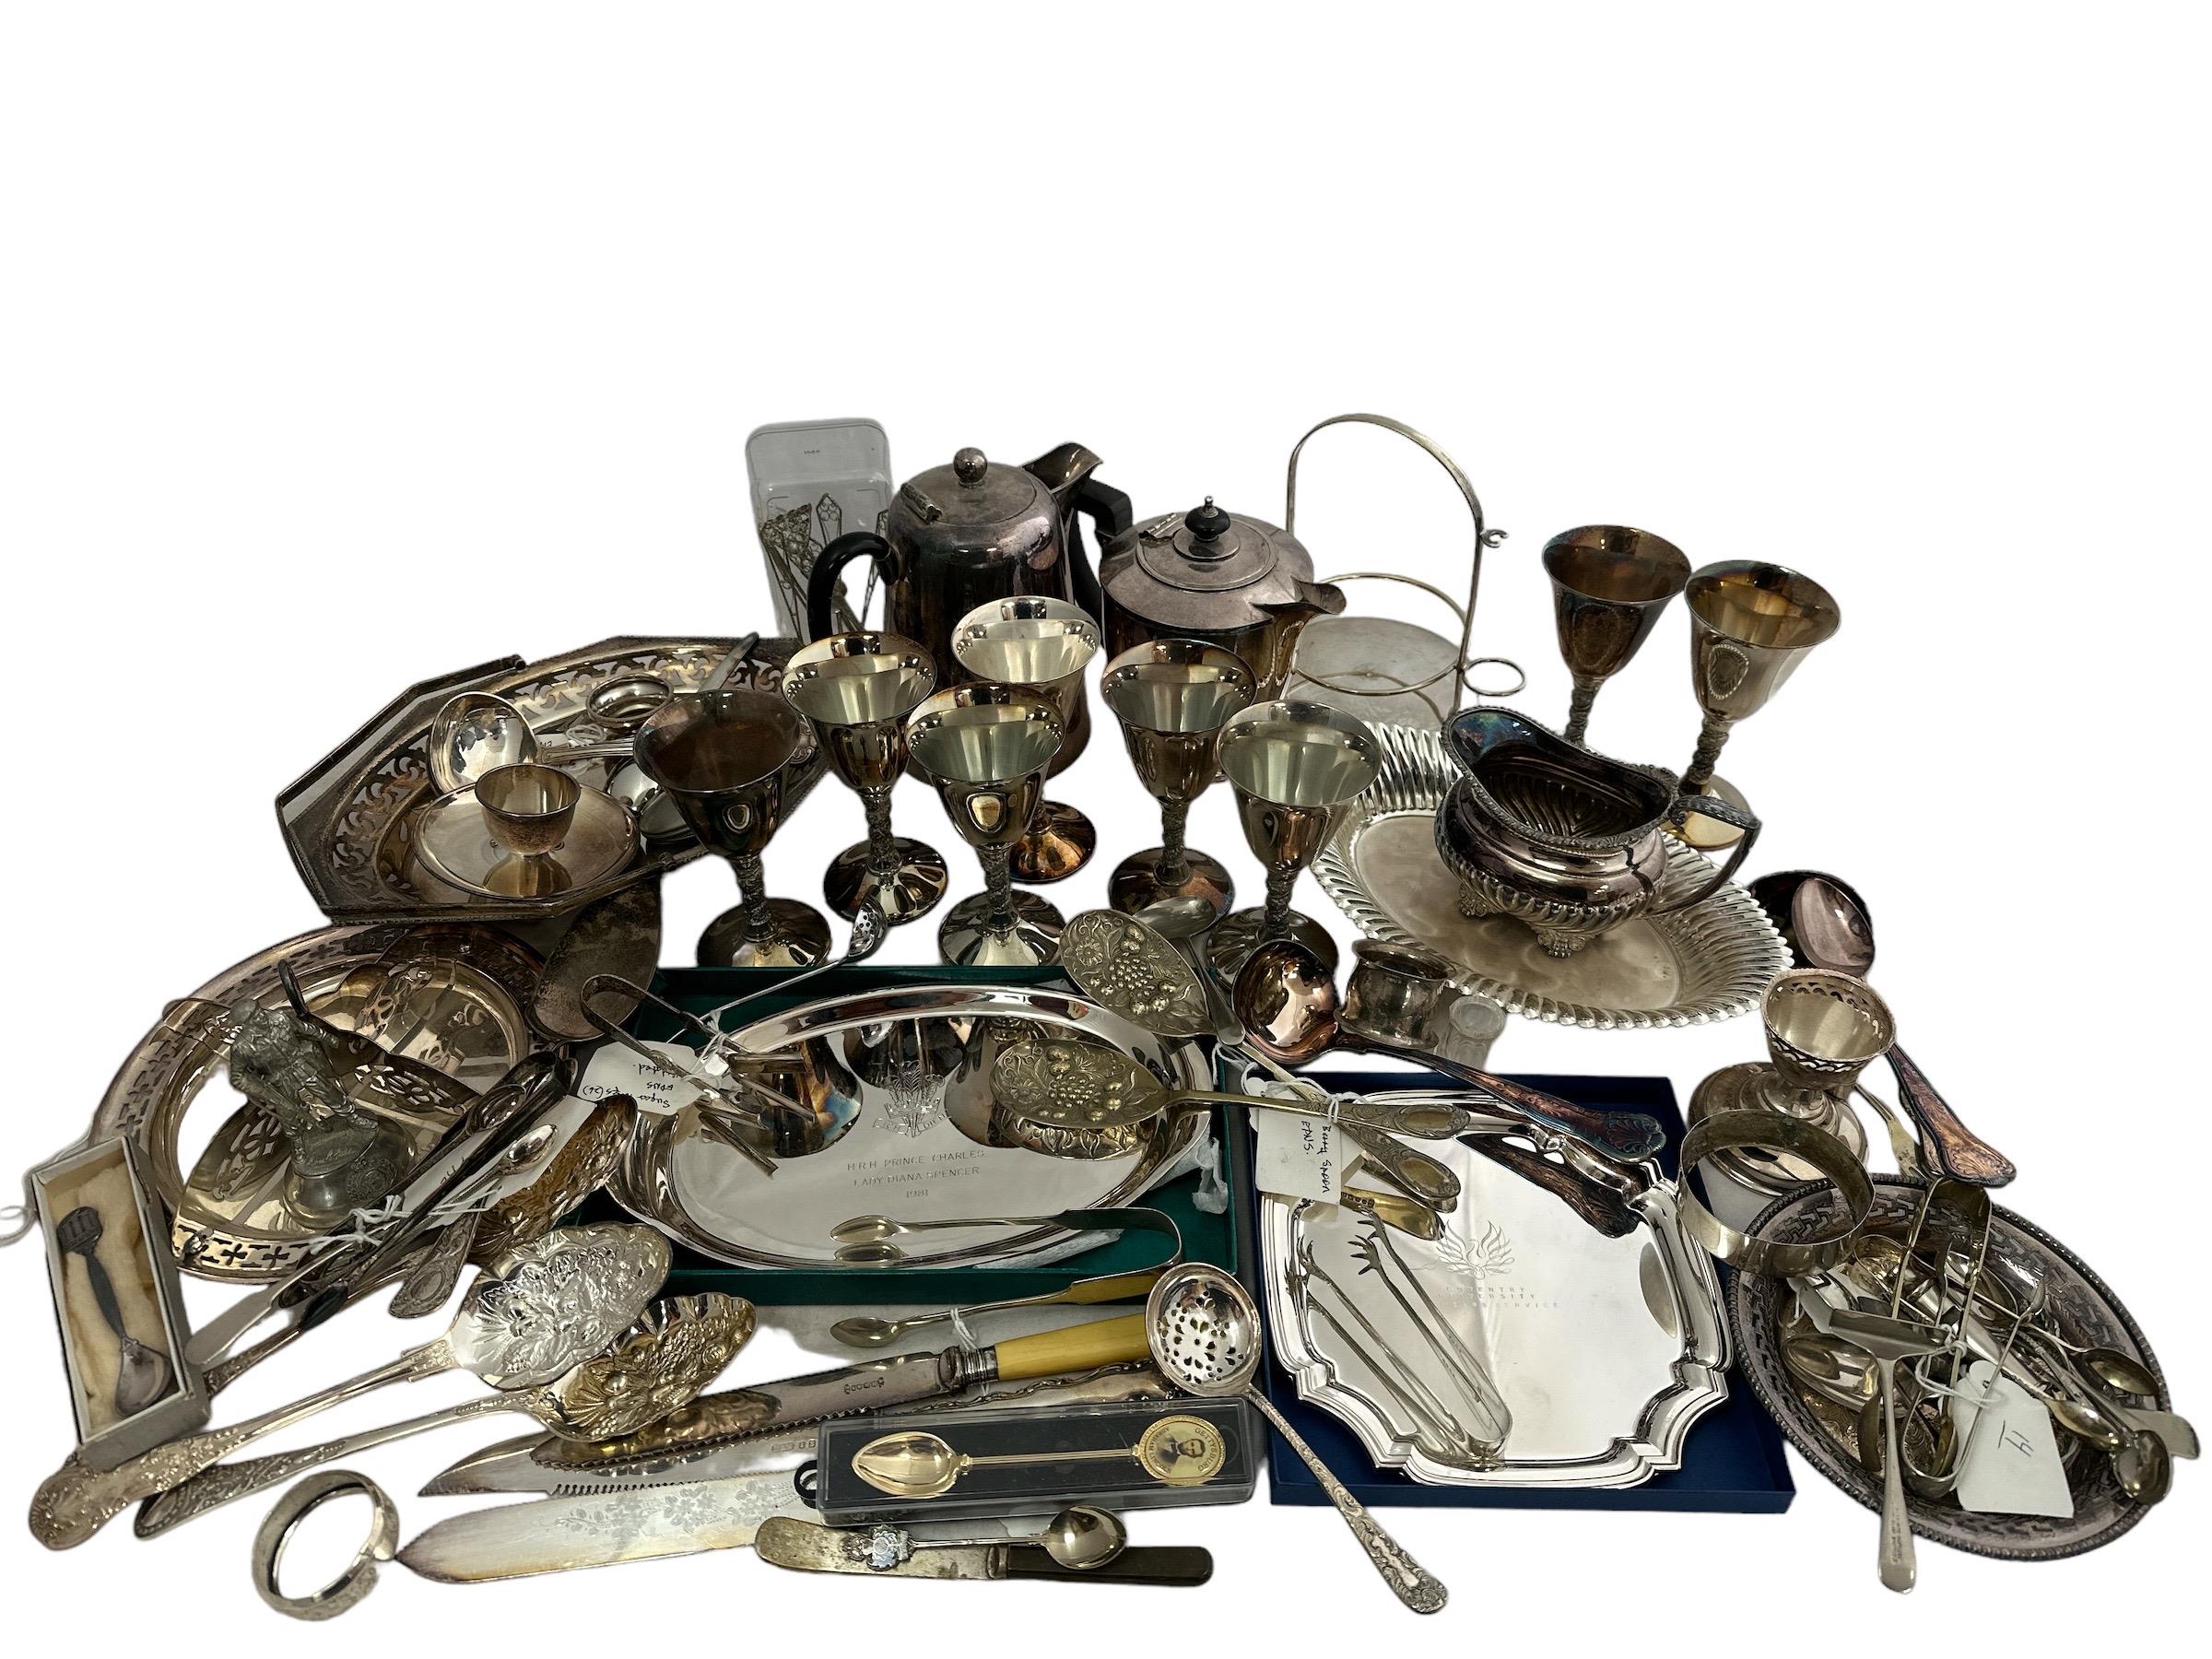 A large number of mostly silver plated and some white metal items, including a silver plated